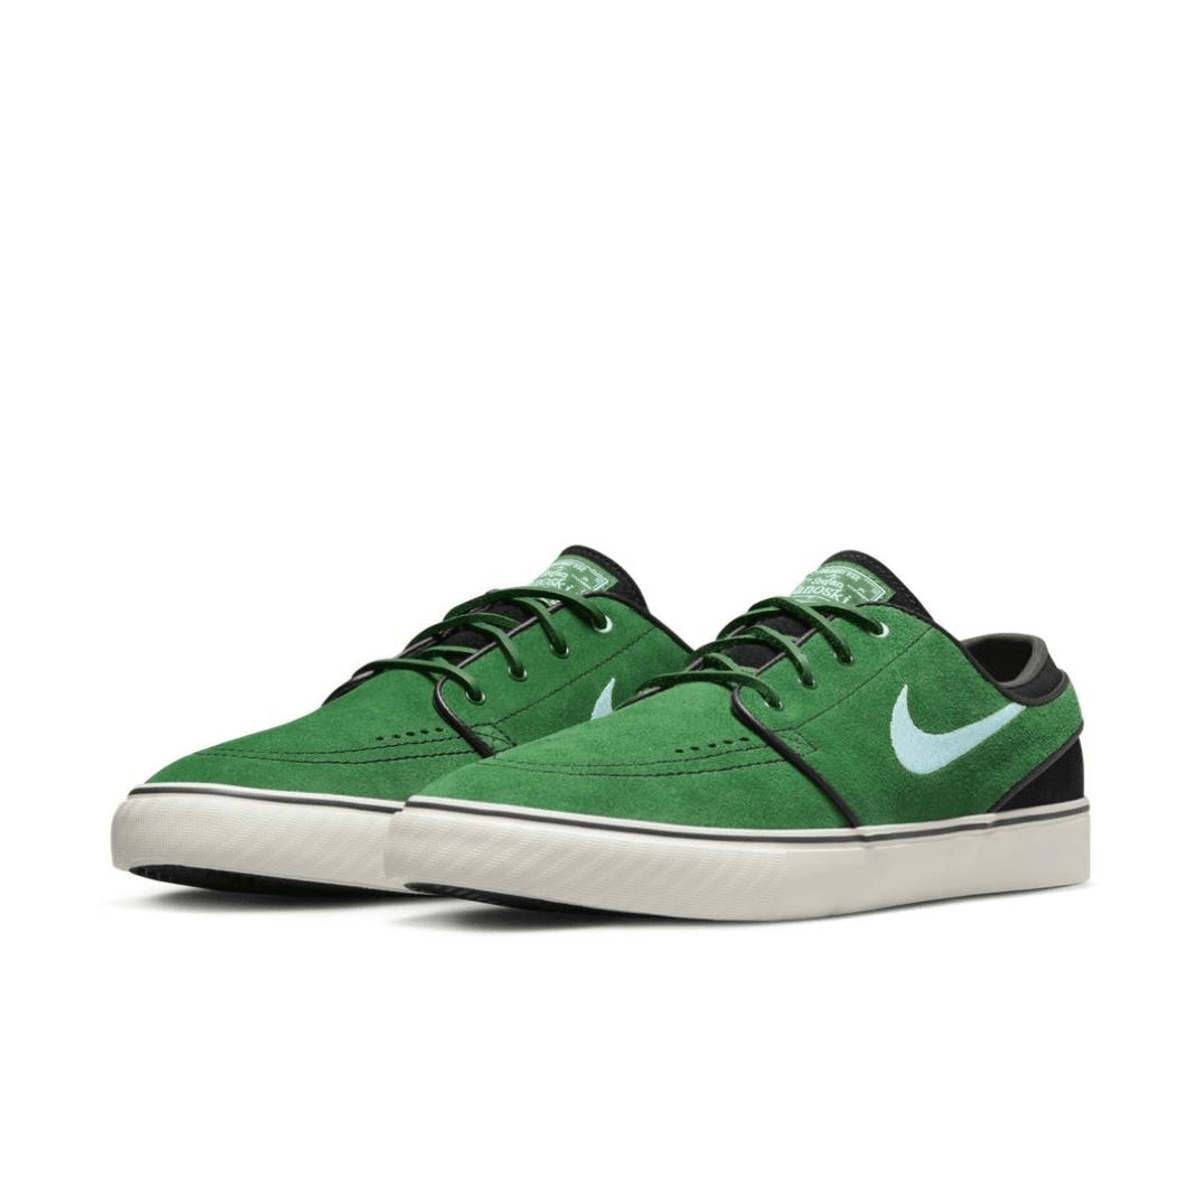 Nike SB Unveils The Janoski OG+ Gorge Green Scheduled To Drop June 10th